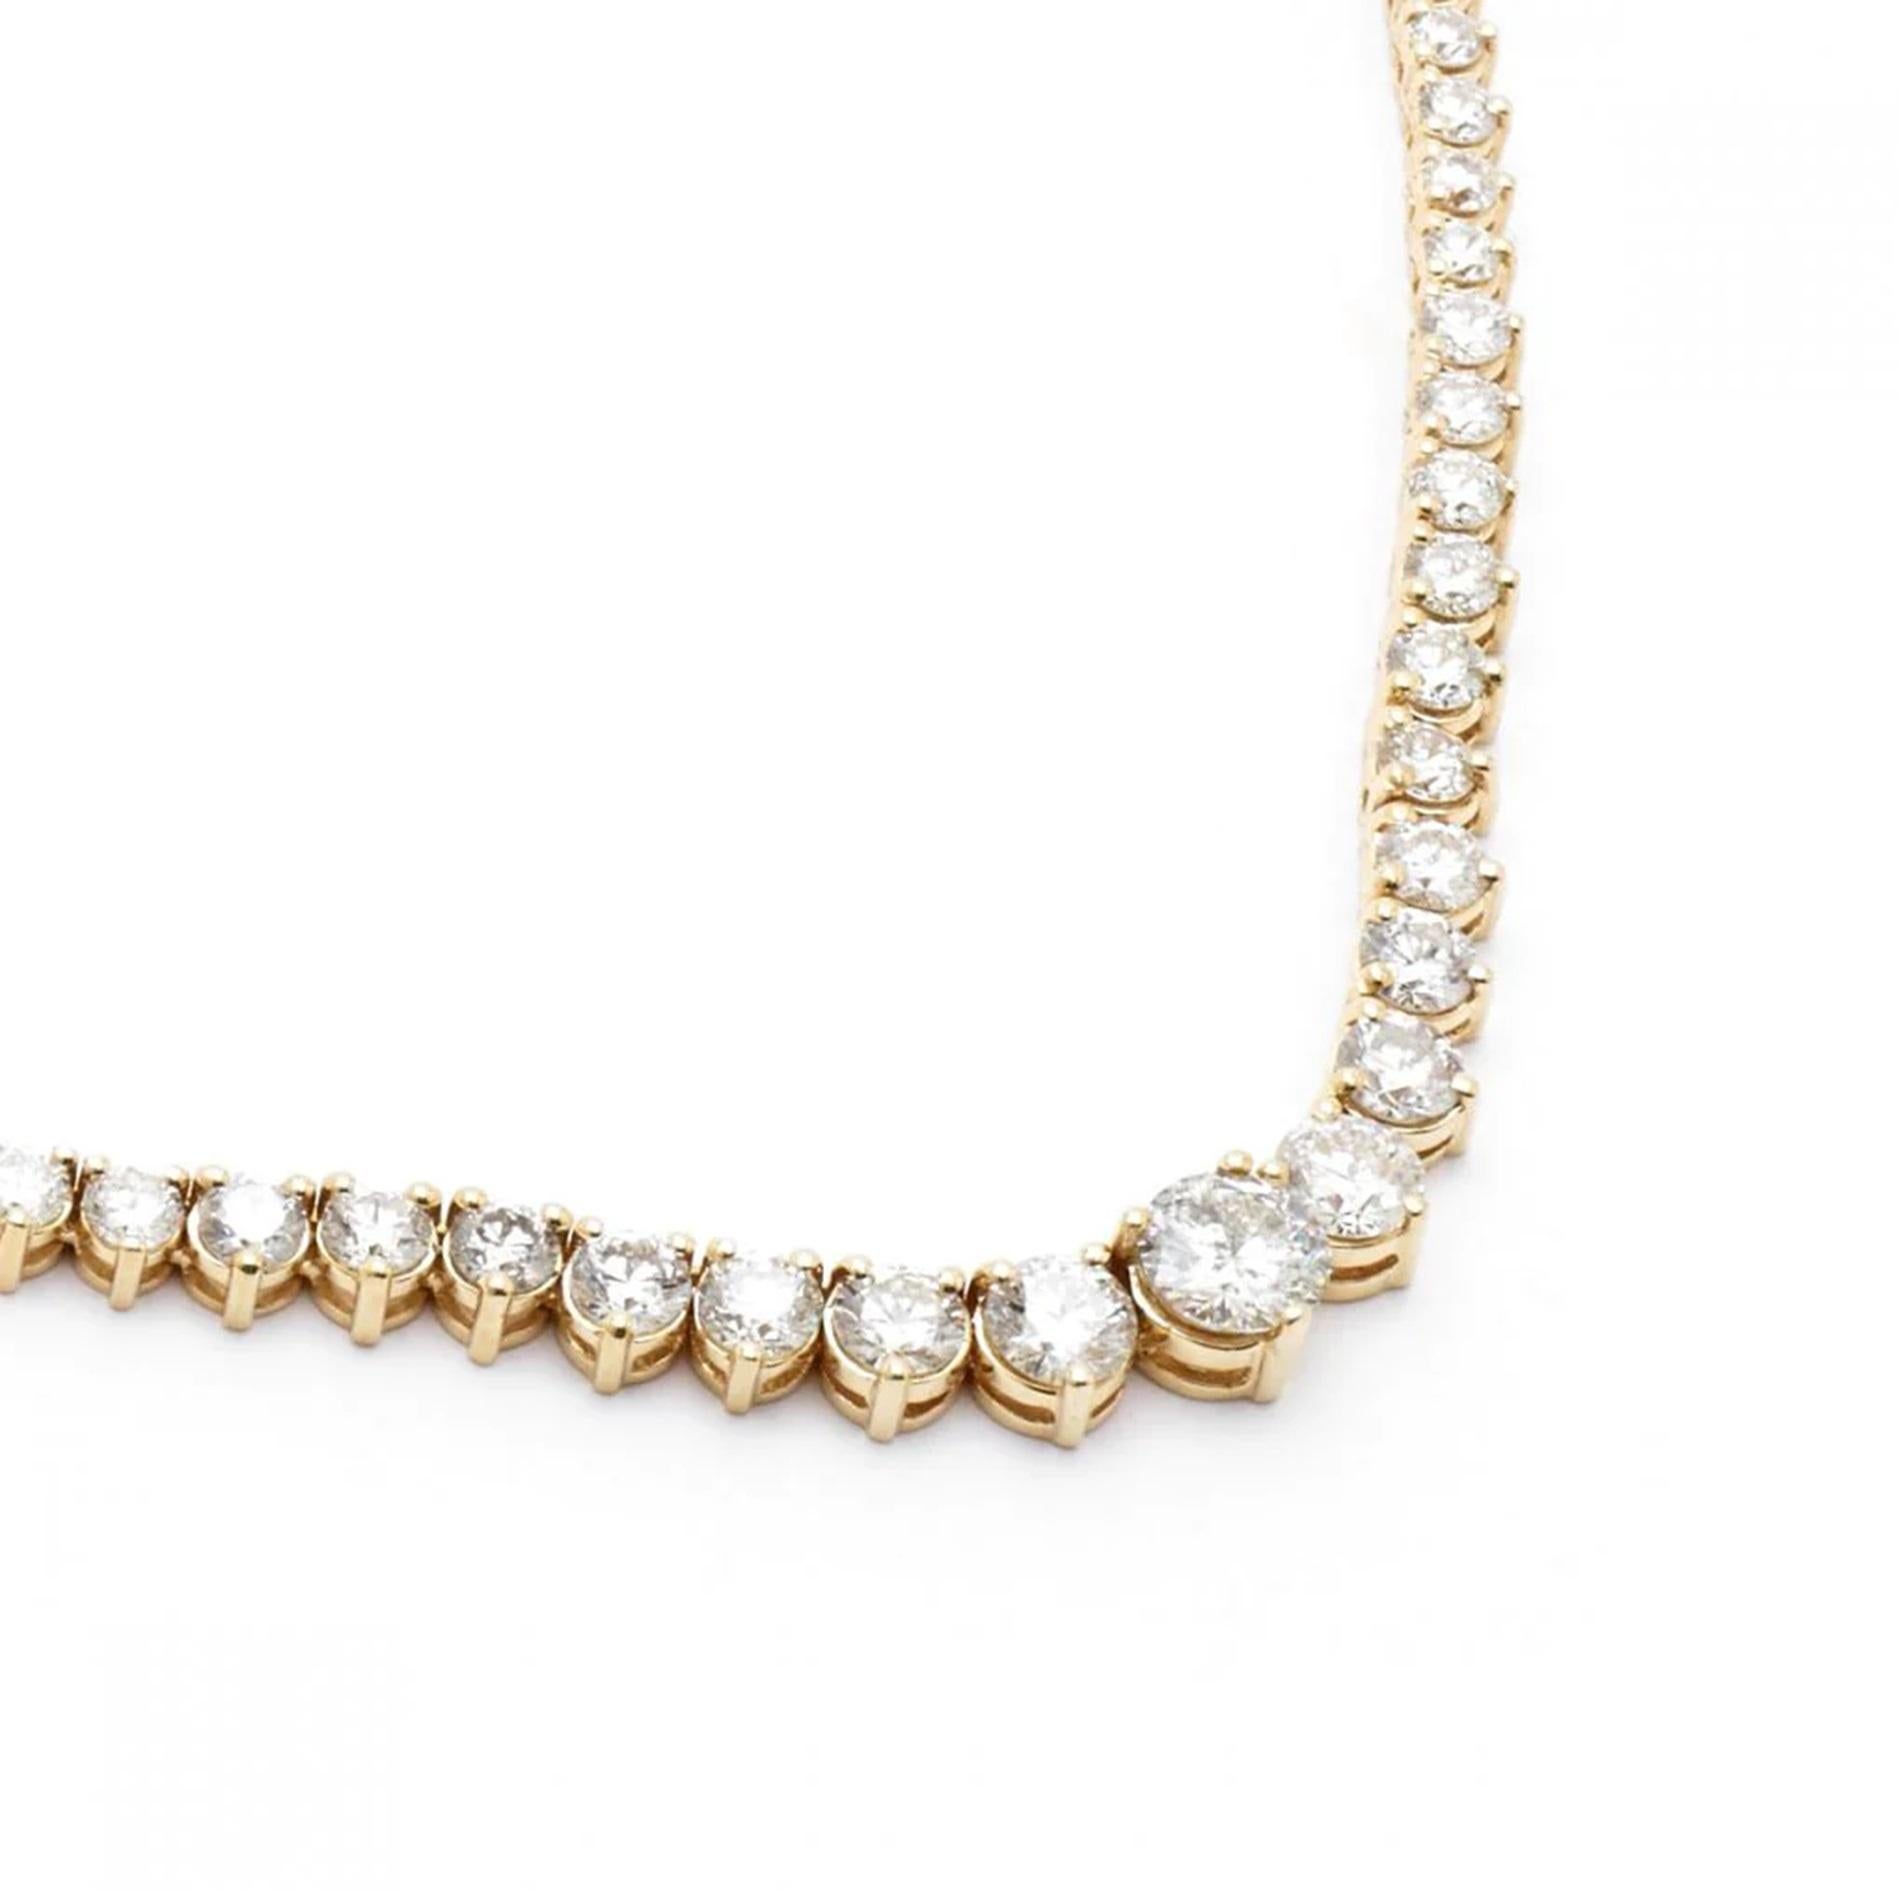 stunning 17.5-inch Graduating Tennis Necklace, a true embodiment of luxury, meticulously crafted in lustrous 18K Yellow Gold. This exquisite necklace is adorned with 168 round diamonds, each securely nestled in a three-prong setting, showcasing a